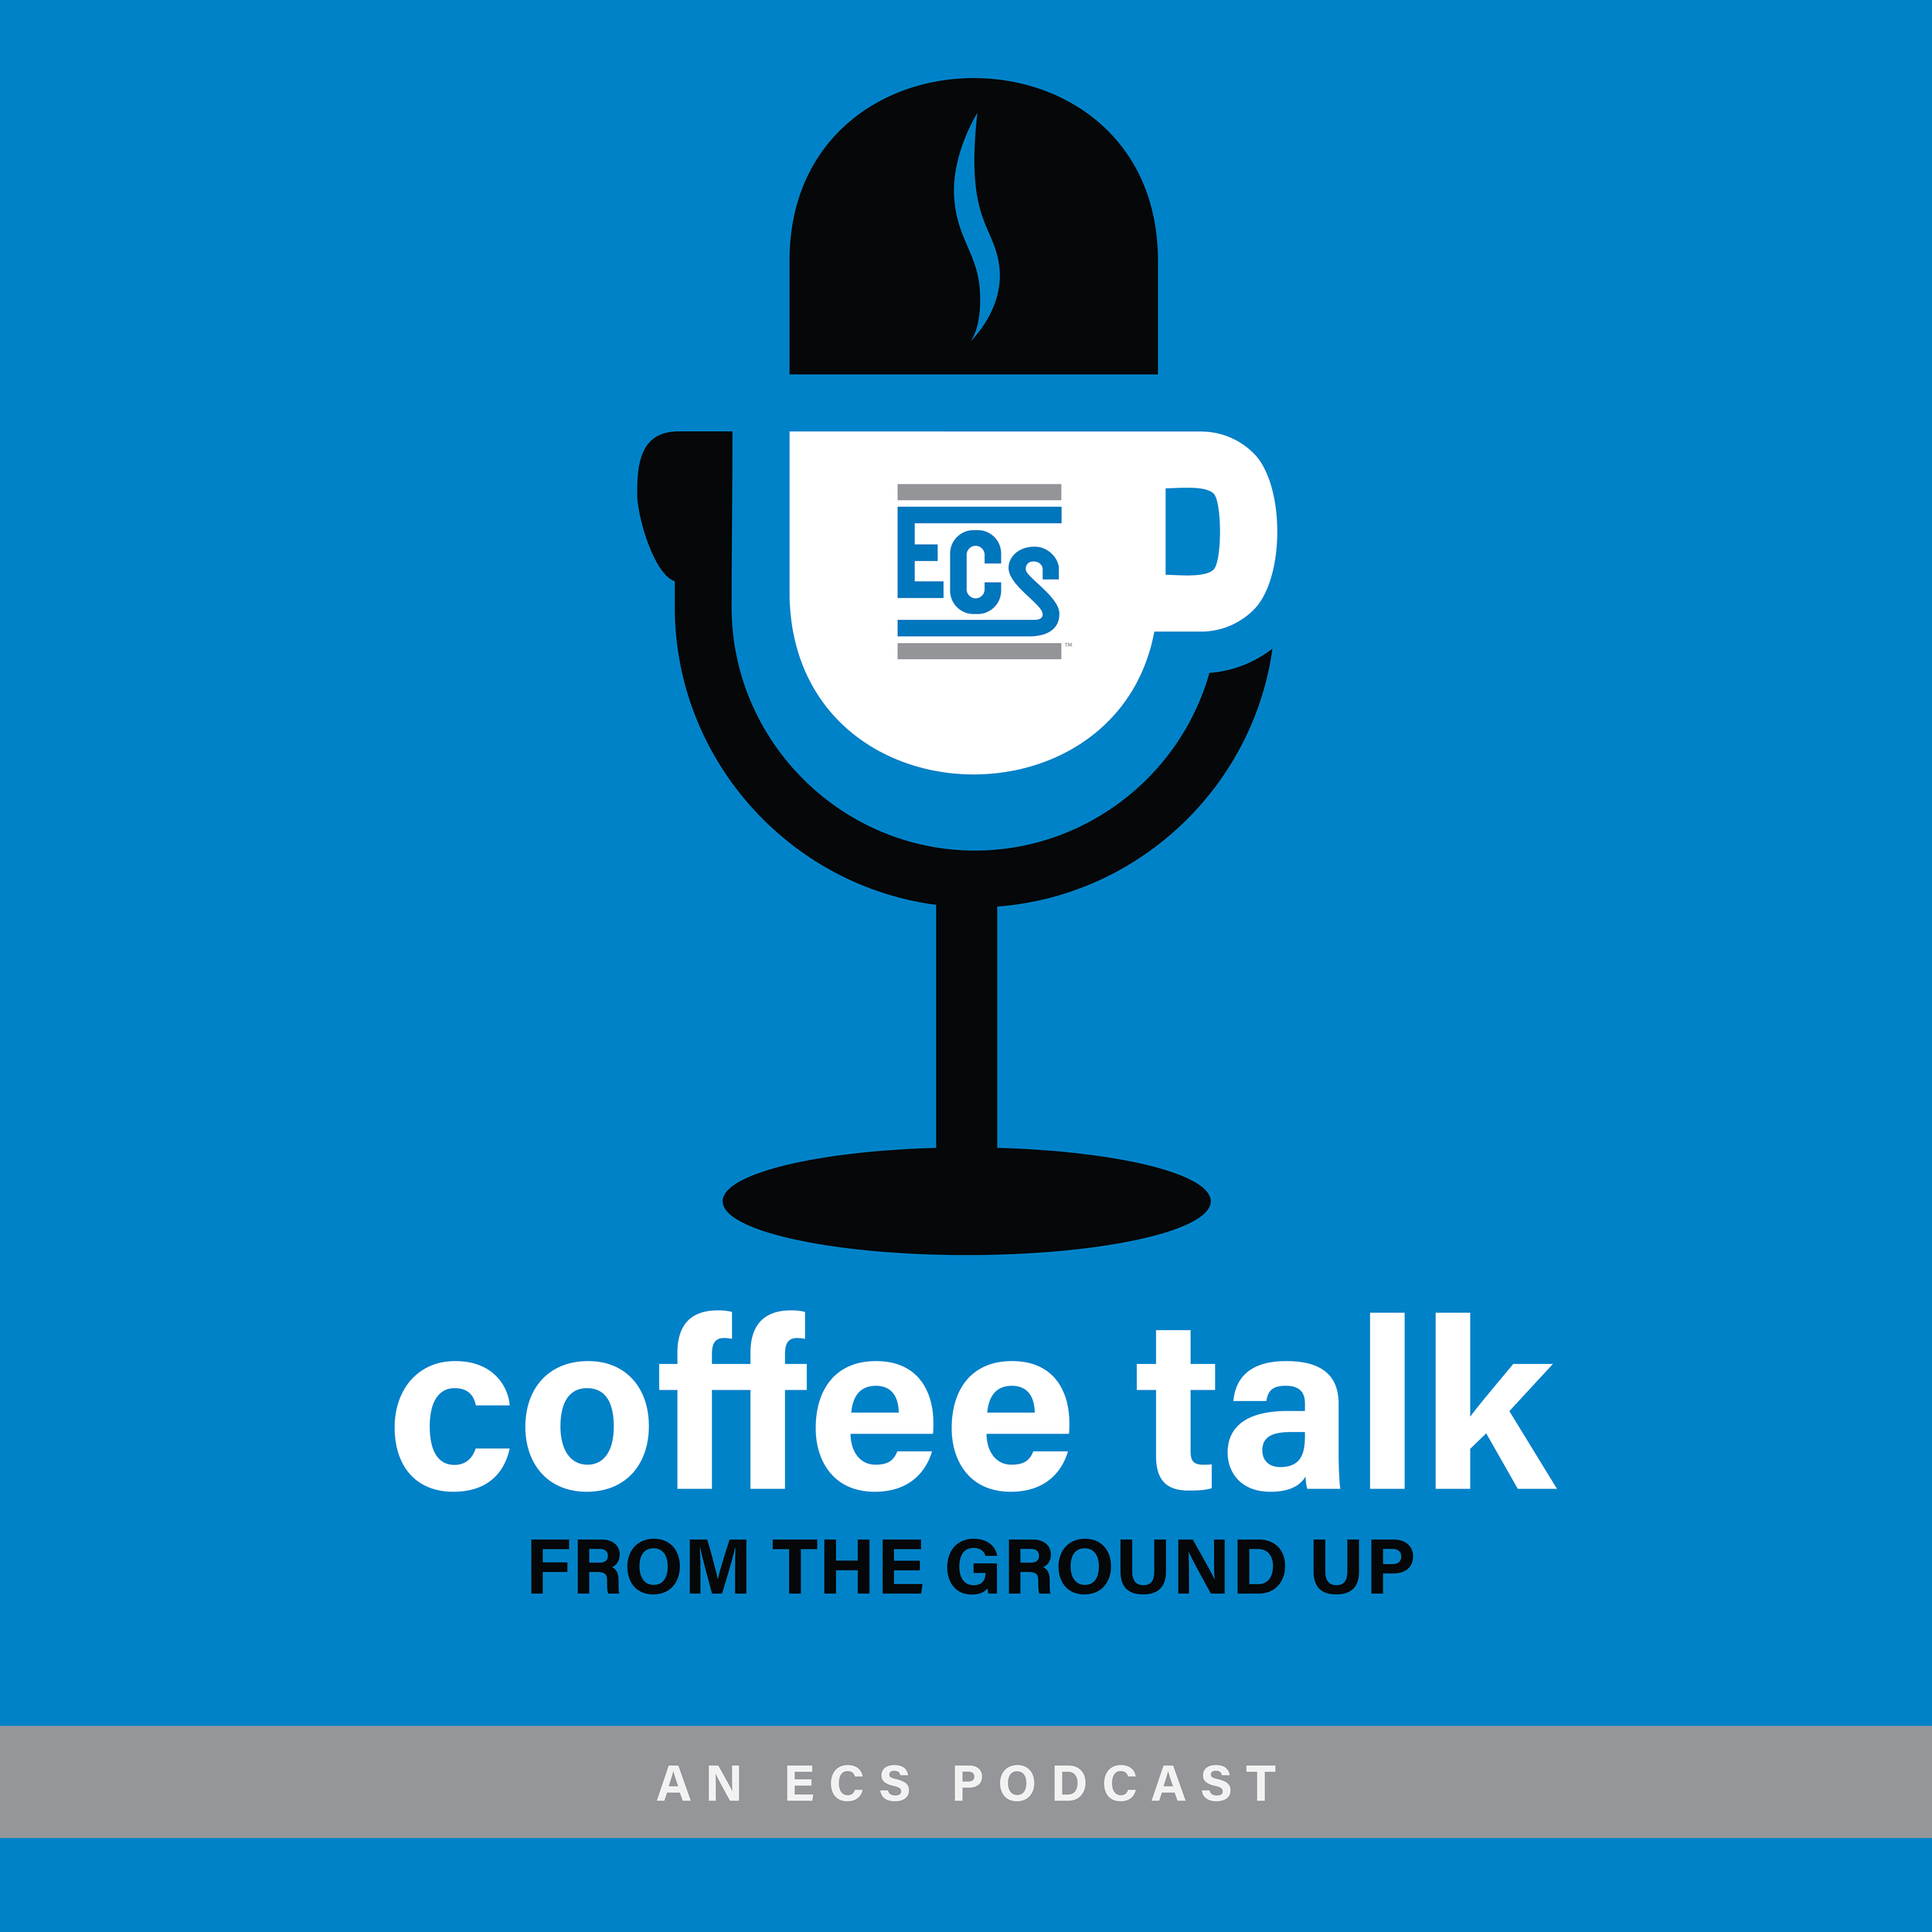 Coffee talk podcast artwork_Recommended Framing.png